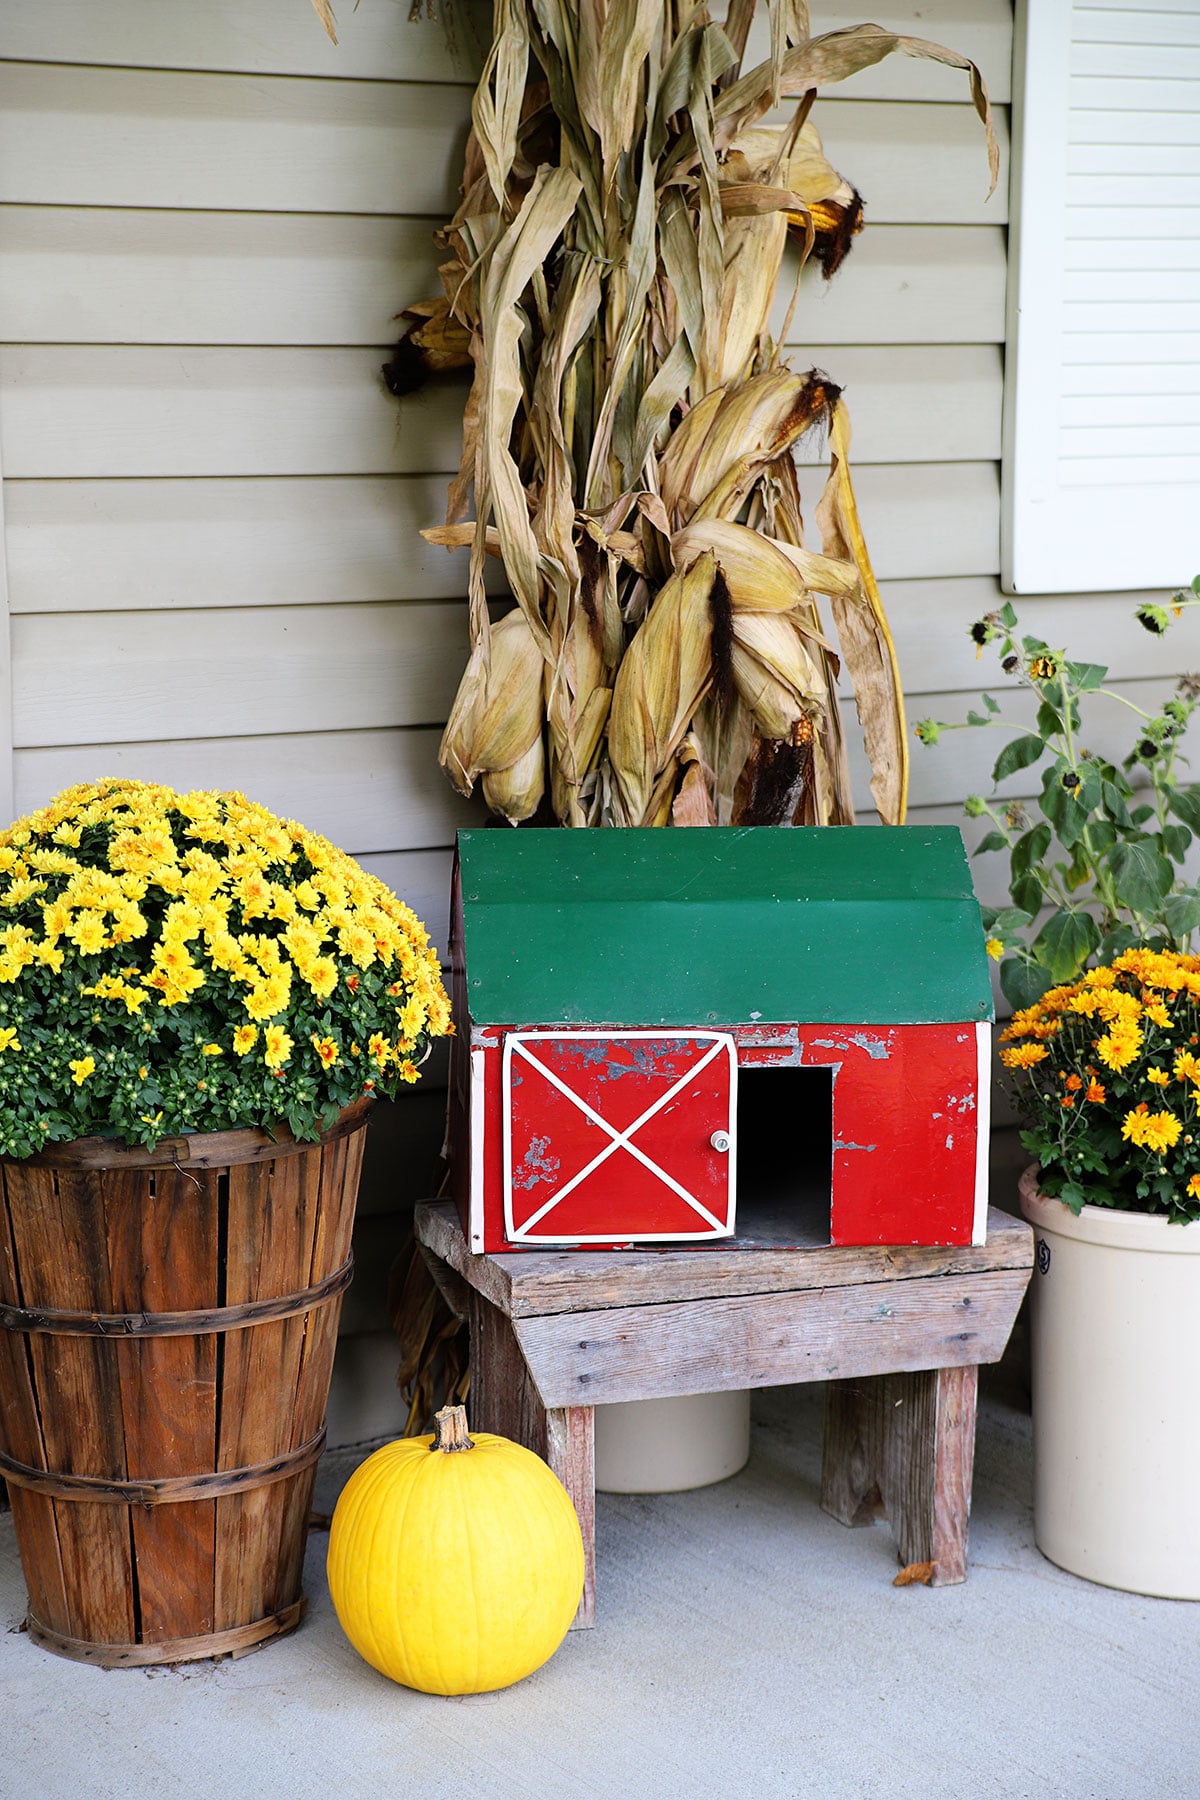 Little red toy barn on the front porch for fall decorations.